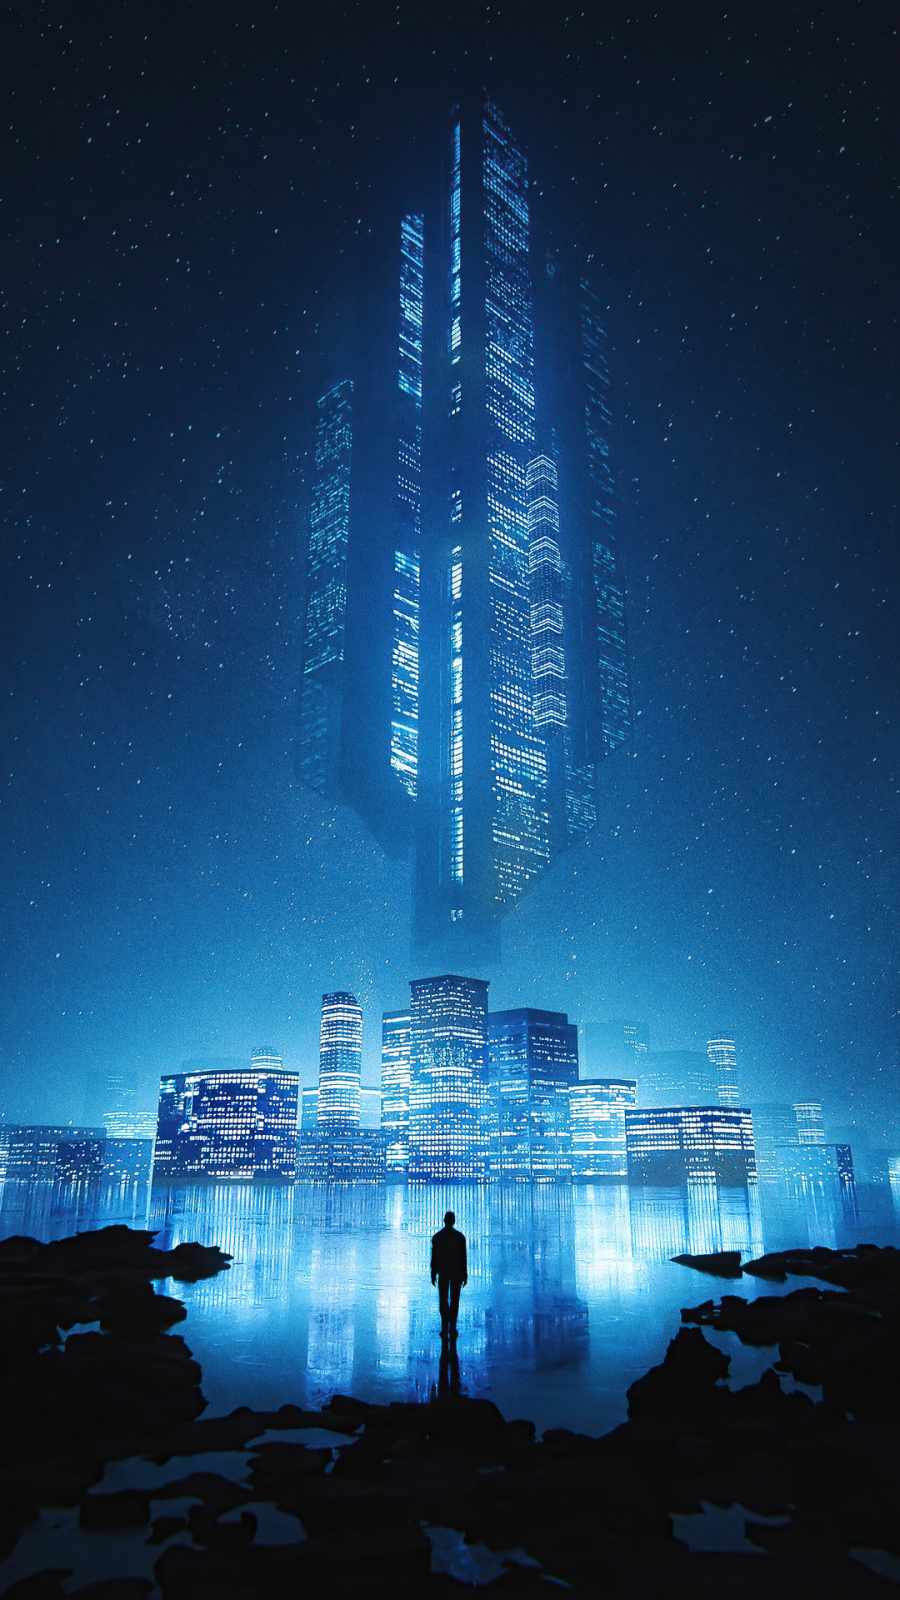 My Blue City 4K IPhone Wallpaper - IPhone Wallpapers : iPhone Wallpapers